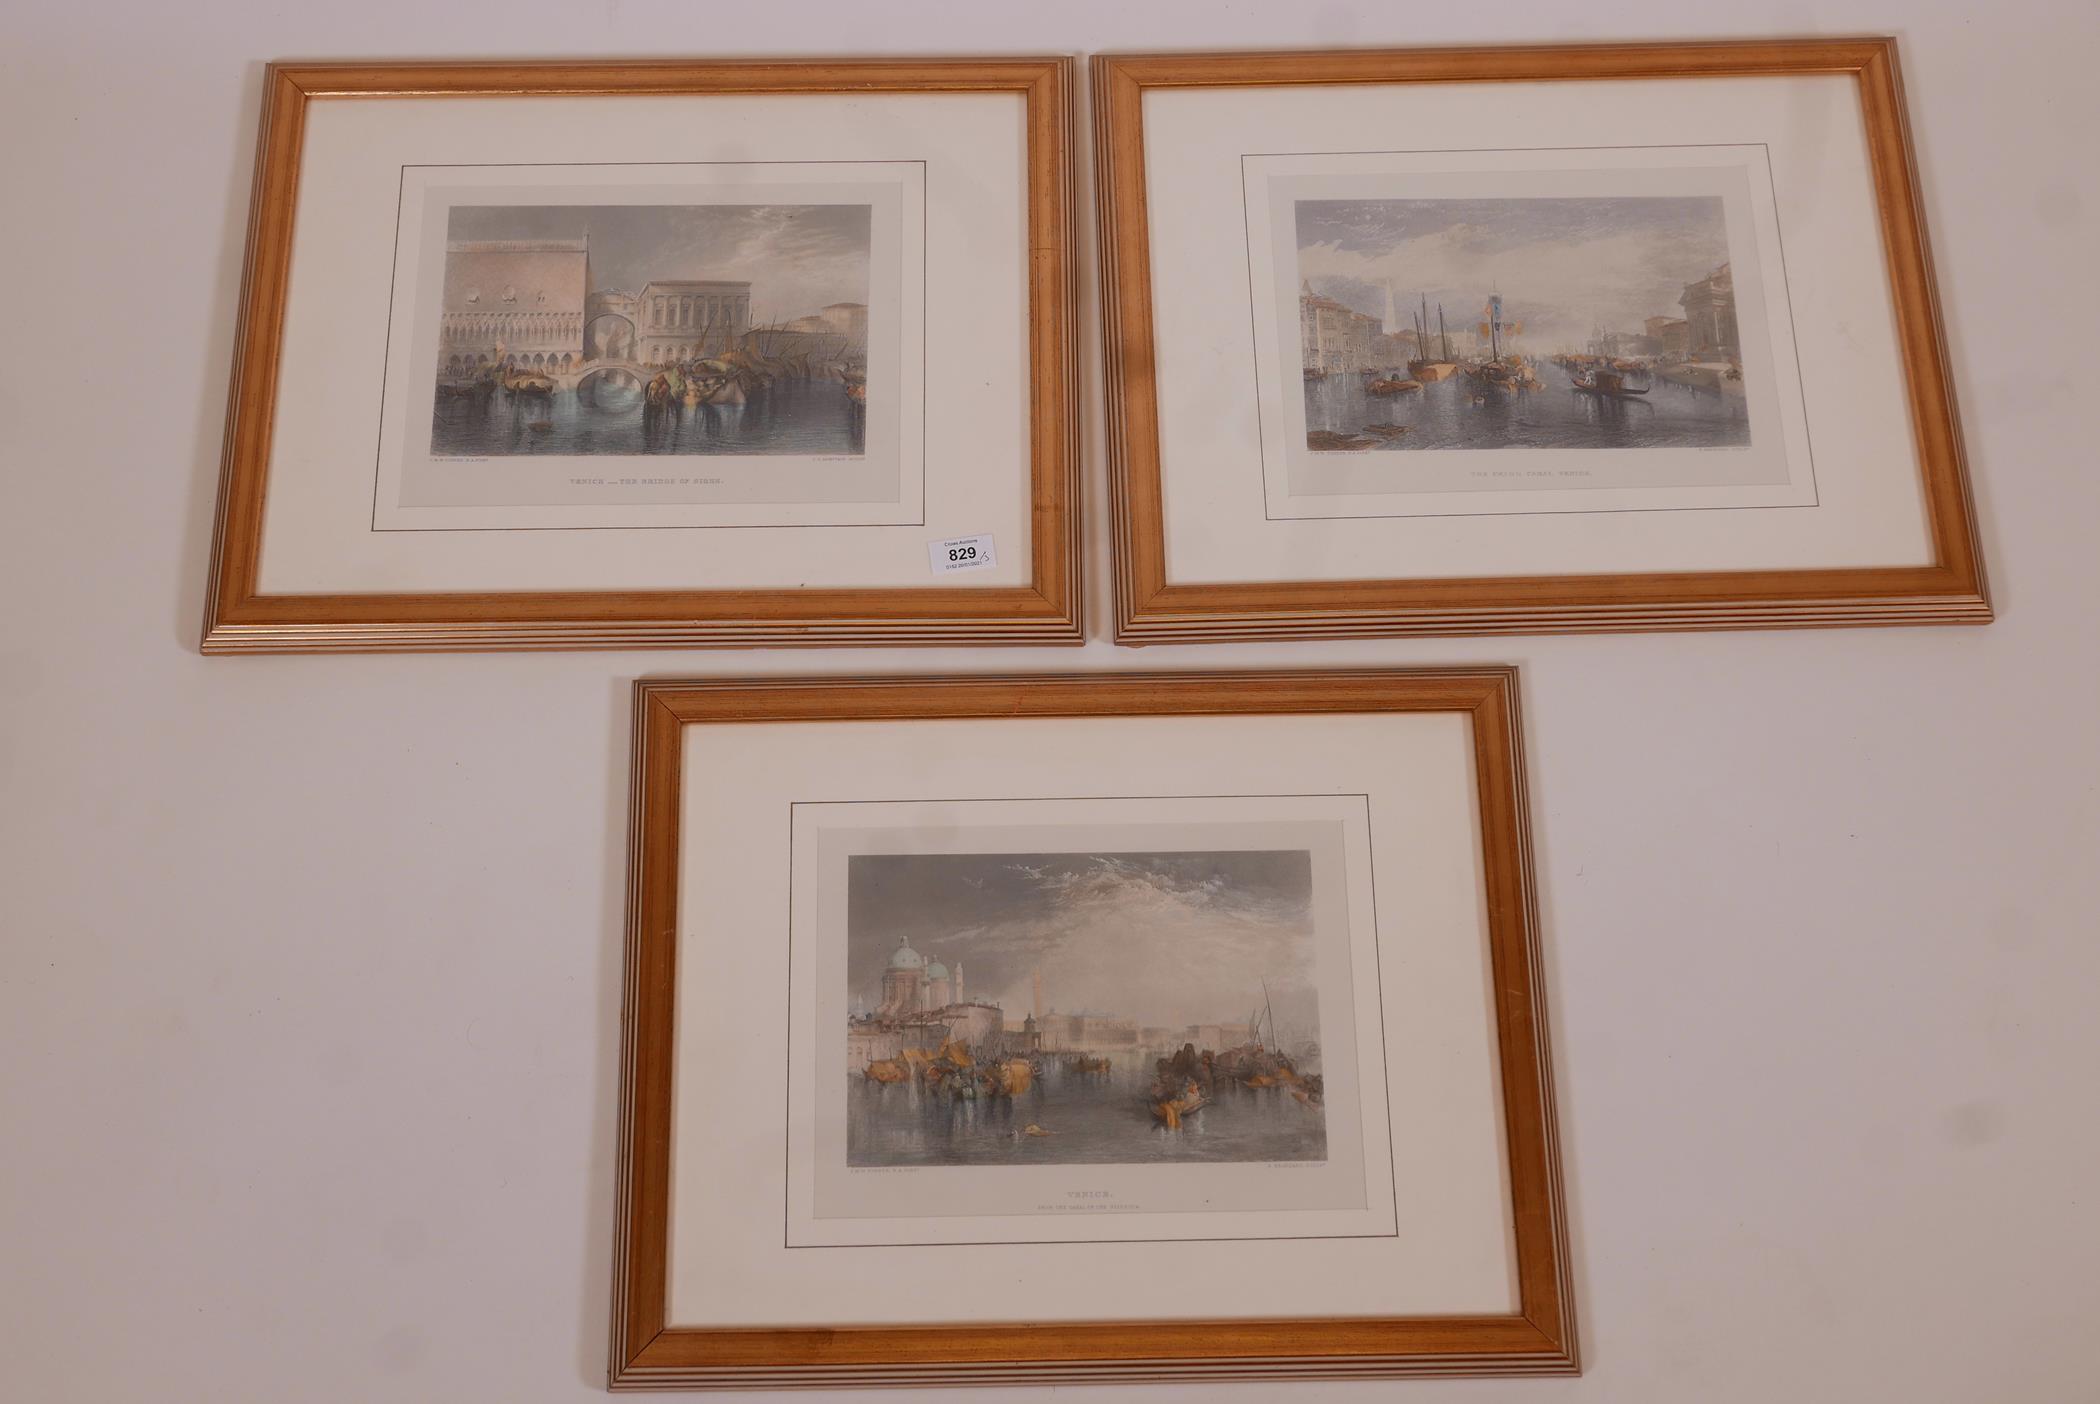 A set of three coloured engravings depicting Venice, after J.W.M. Turner, engraved by J.C. Armytage, - Image 4 of 4